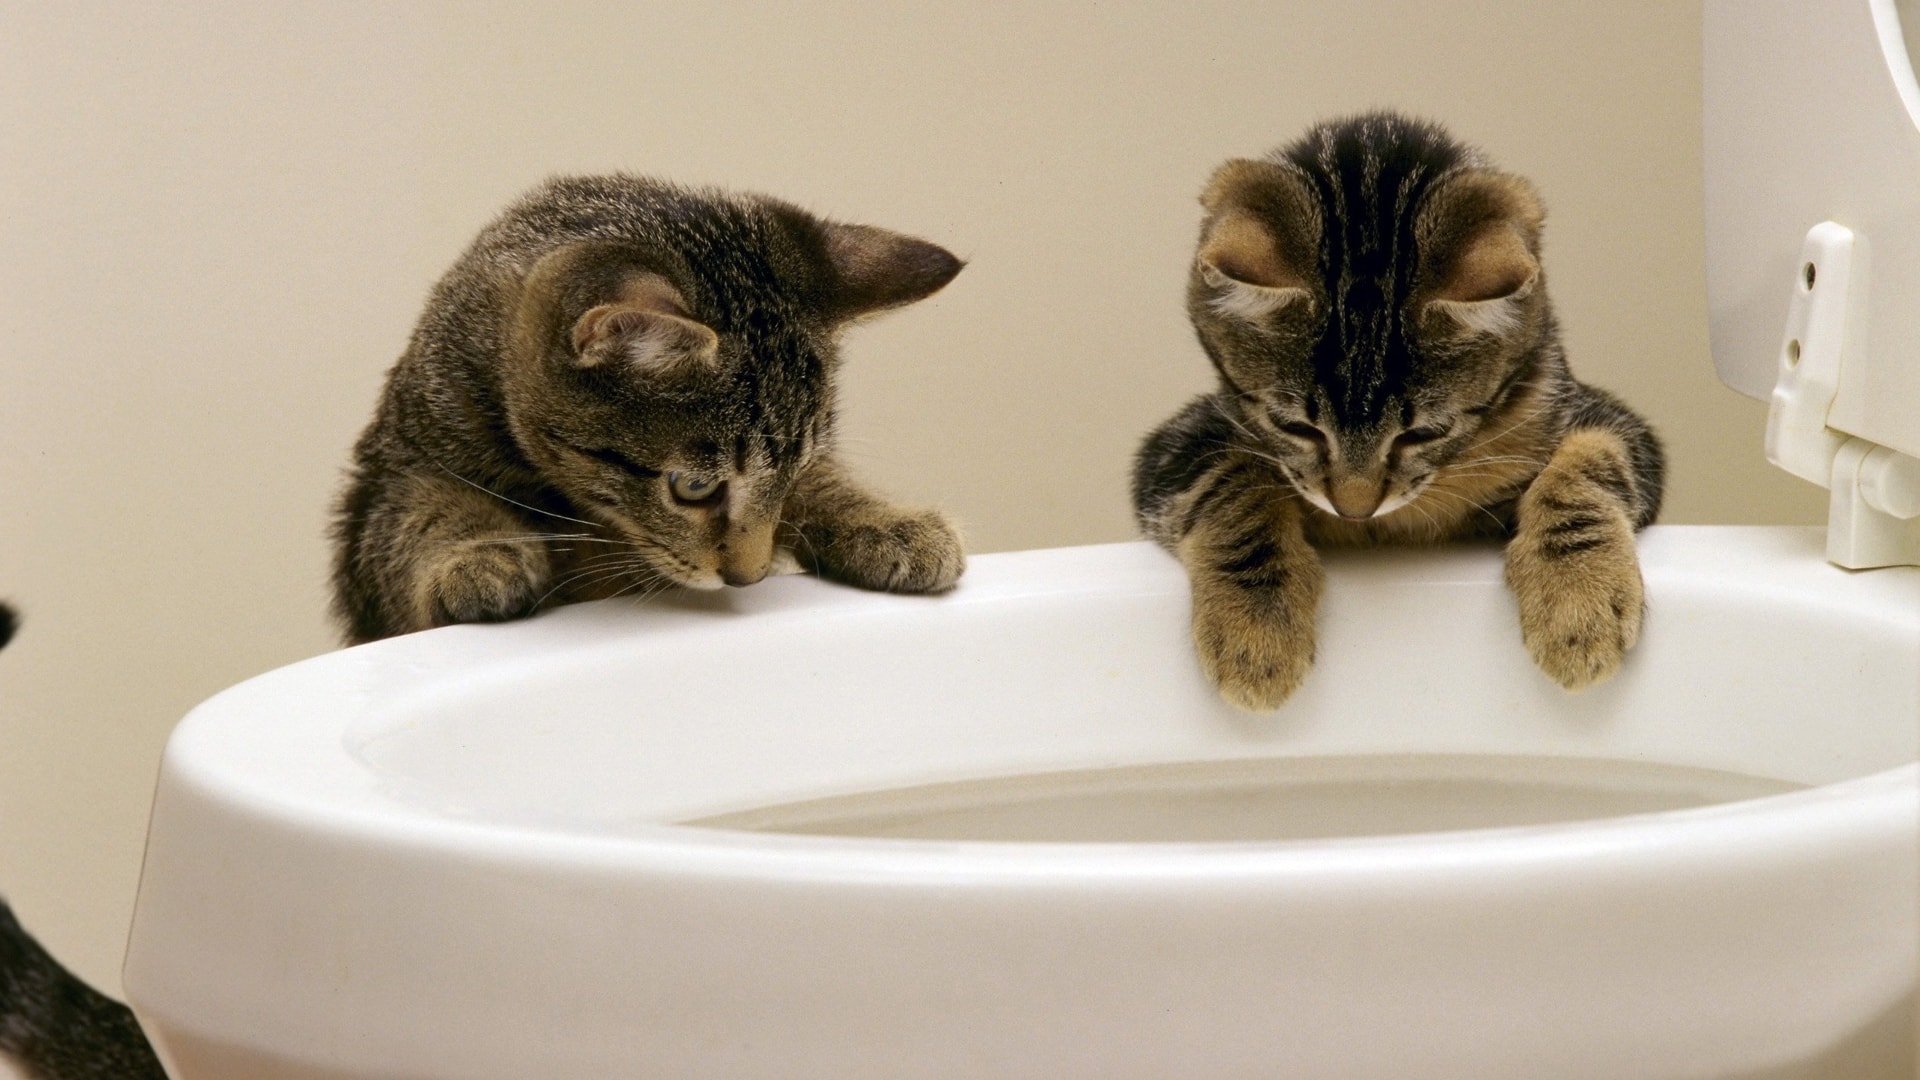 Why Does My Cat Drink from the Toilet?